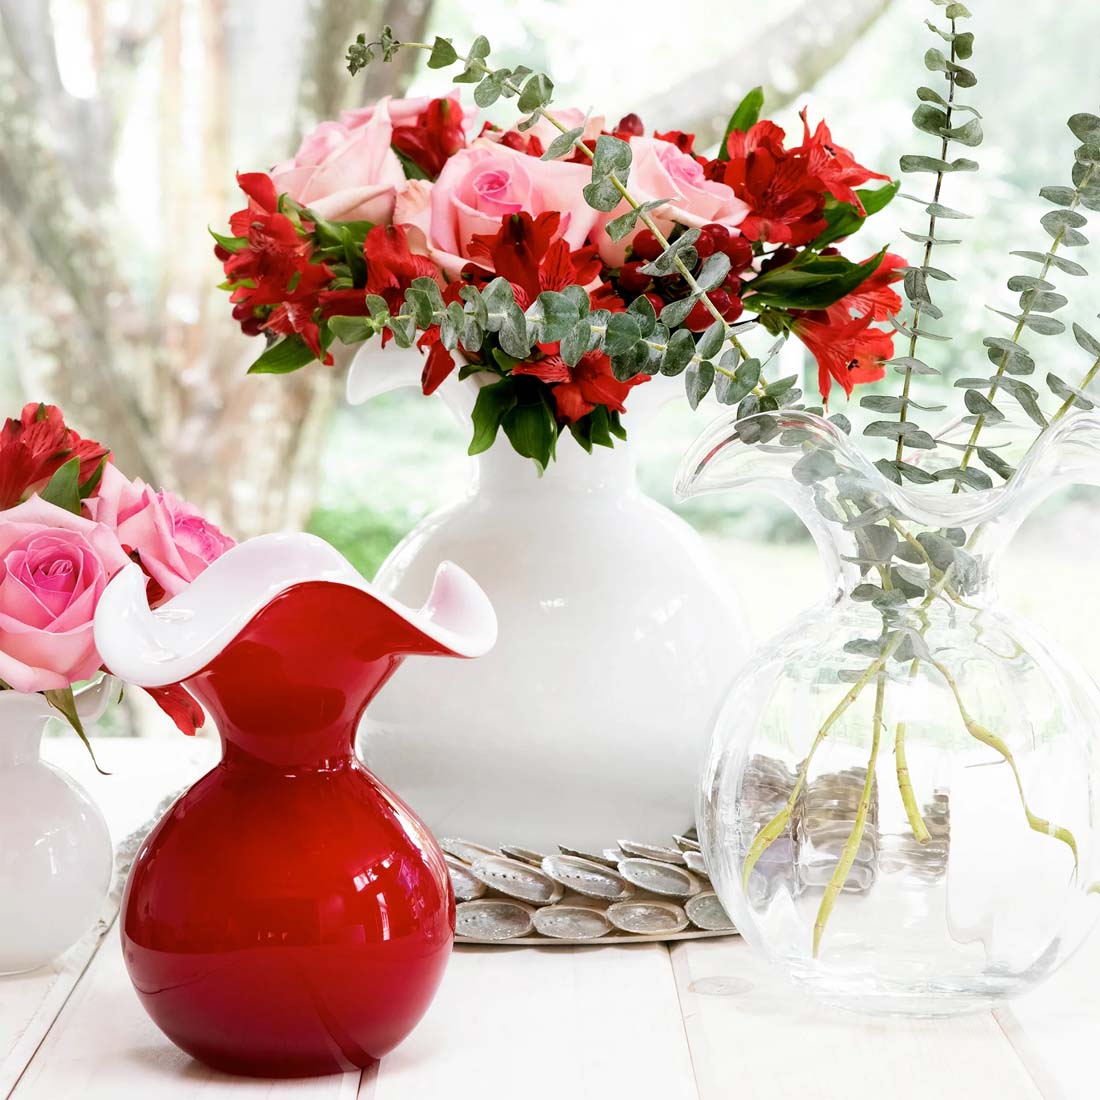 Red Hibiscus Fluted Vase